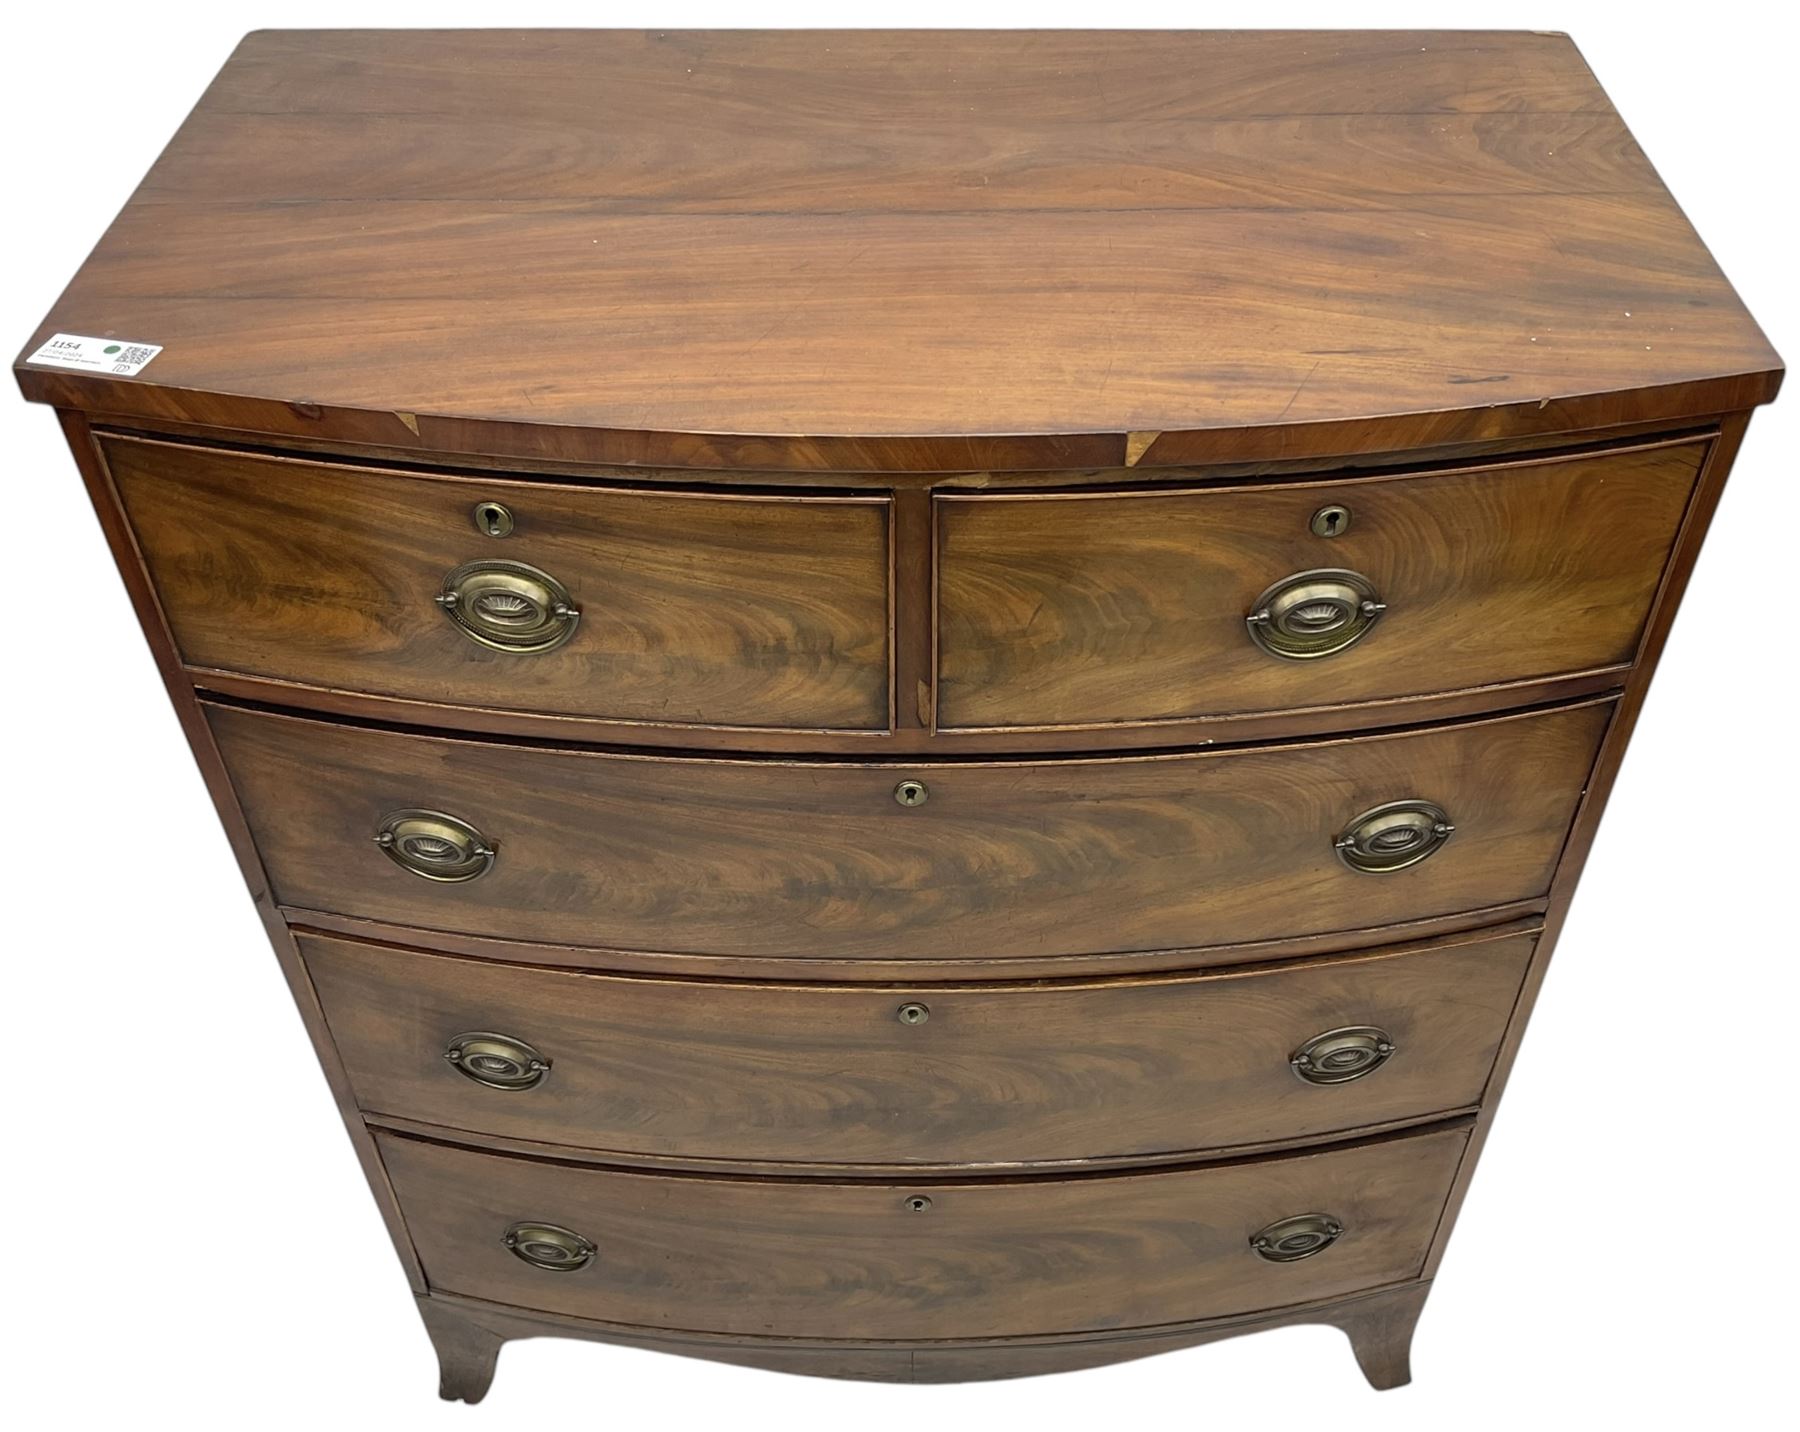 Victorian mahogany bow-front chest - Image 6 of 8